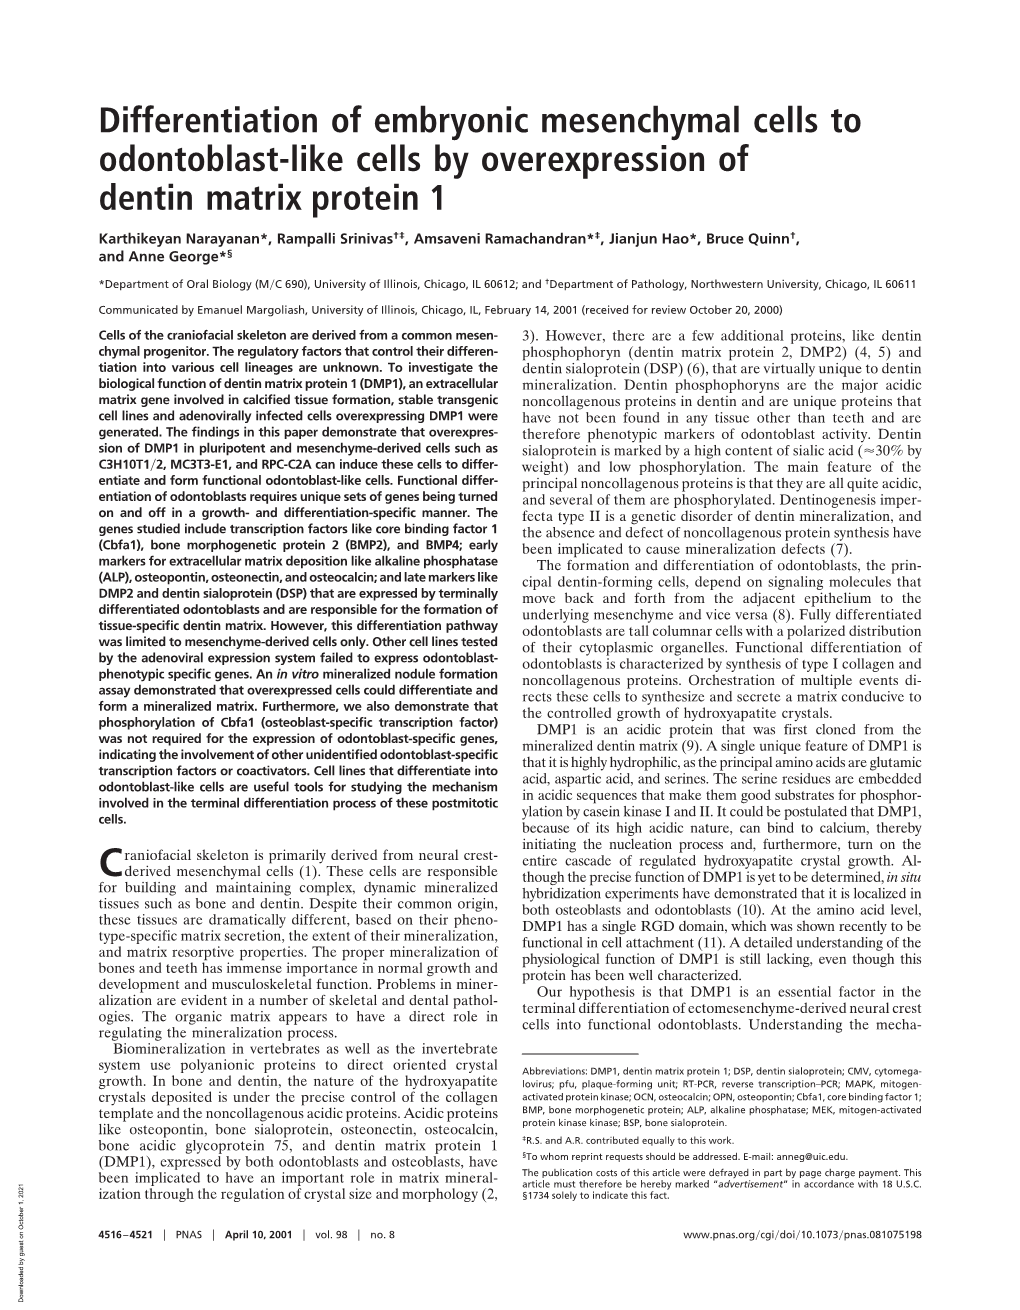 Differentiation of Embryonic Mesenchymal Cells to Odontoblast-Like Cells by Overexpression of Dentin Matrix Protein 1